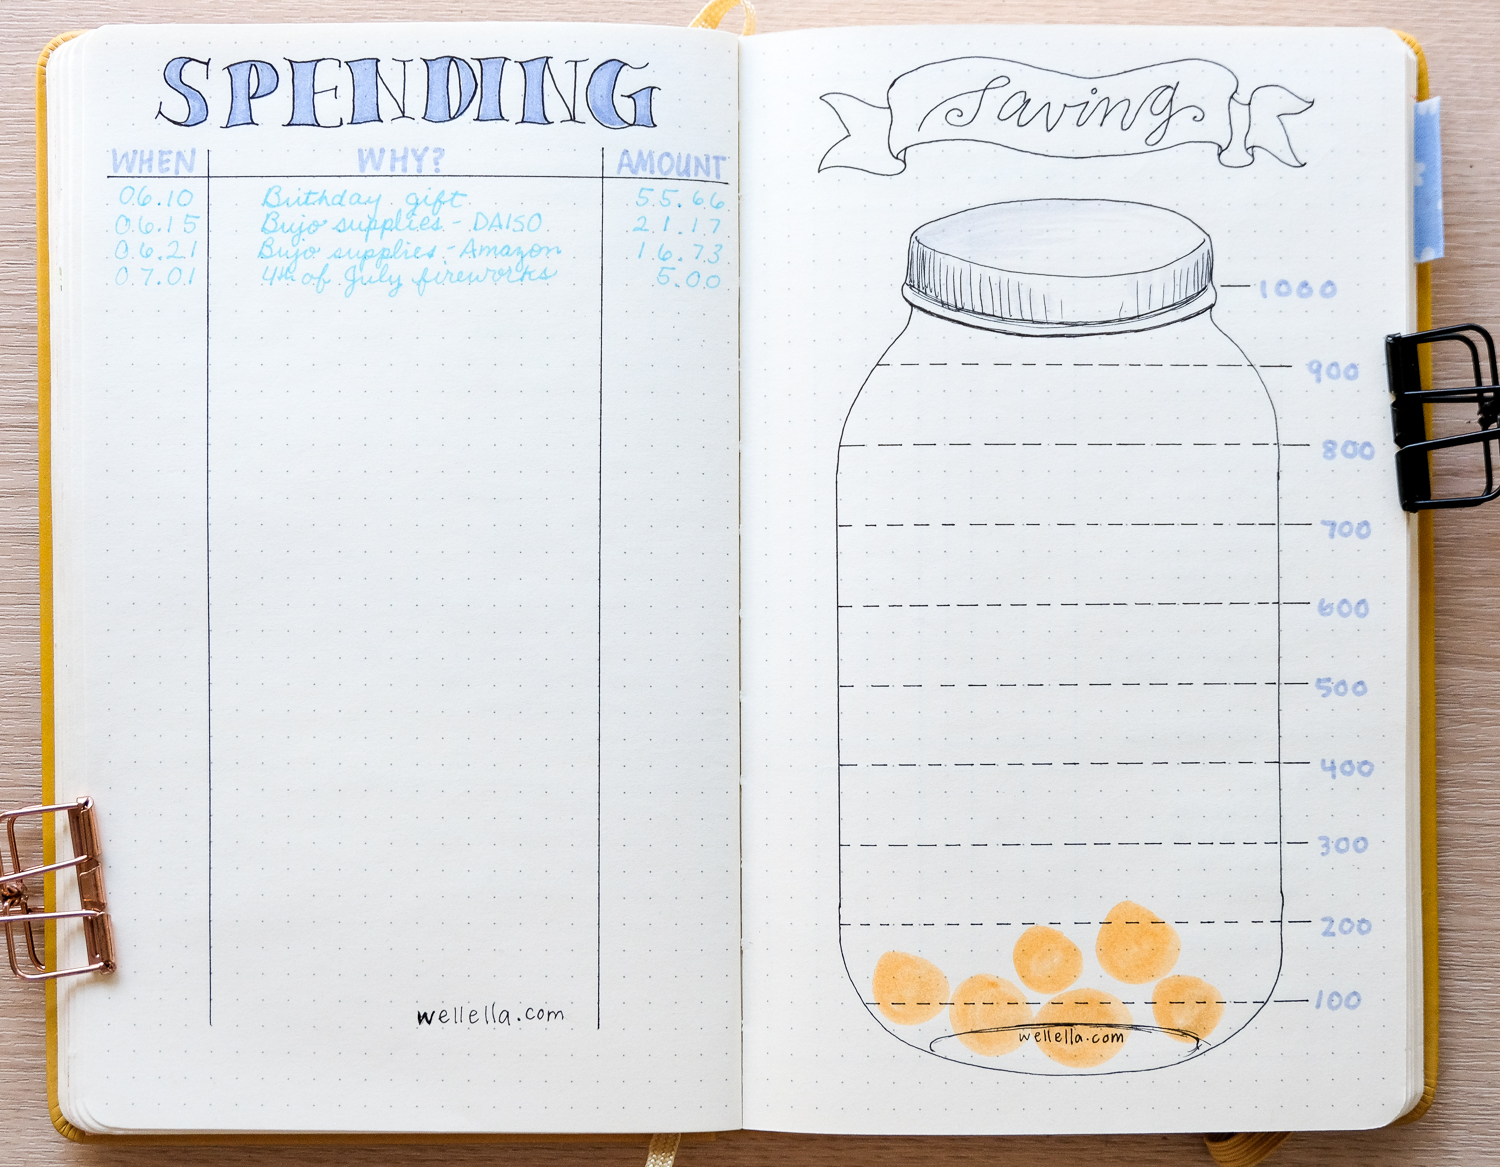 Bullet journal money trackers are a cool and fun way to track your spending, saving, bills, and all your finances. Here are some ways you can keep track of money in your bullet journal.